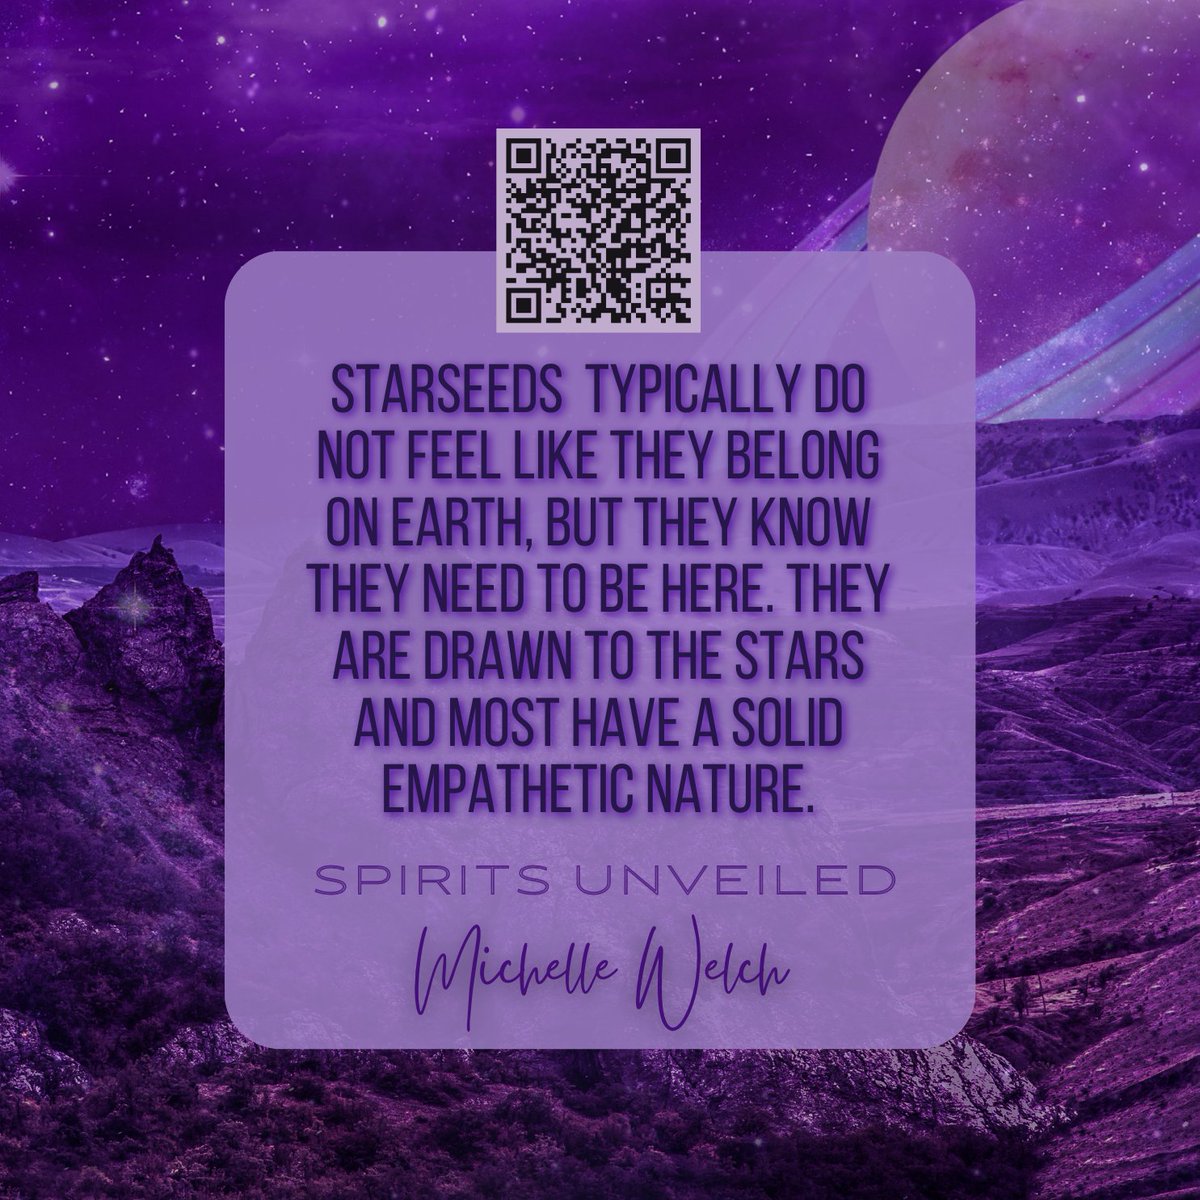 Did you know that in my book 'Spirits Unveiled' I have an exercise that can help you narrow down which starseed you are? 

amazon.com/Spirits-Unveil…

#writerslift #starseed #paranormal #UNIVERSE #extraterrestrial #spiritualbeing #spiritualawakening